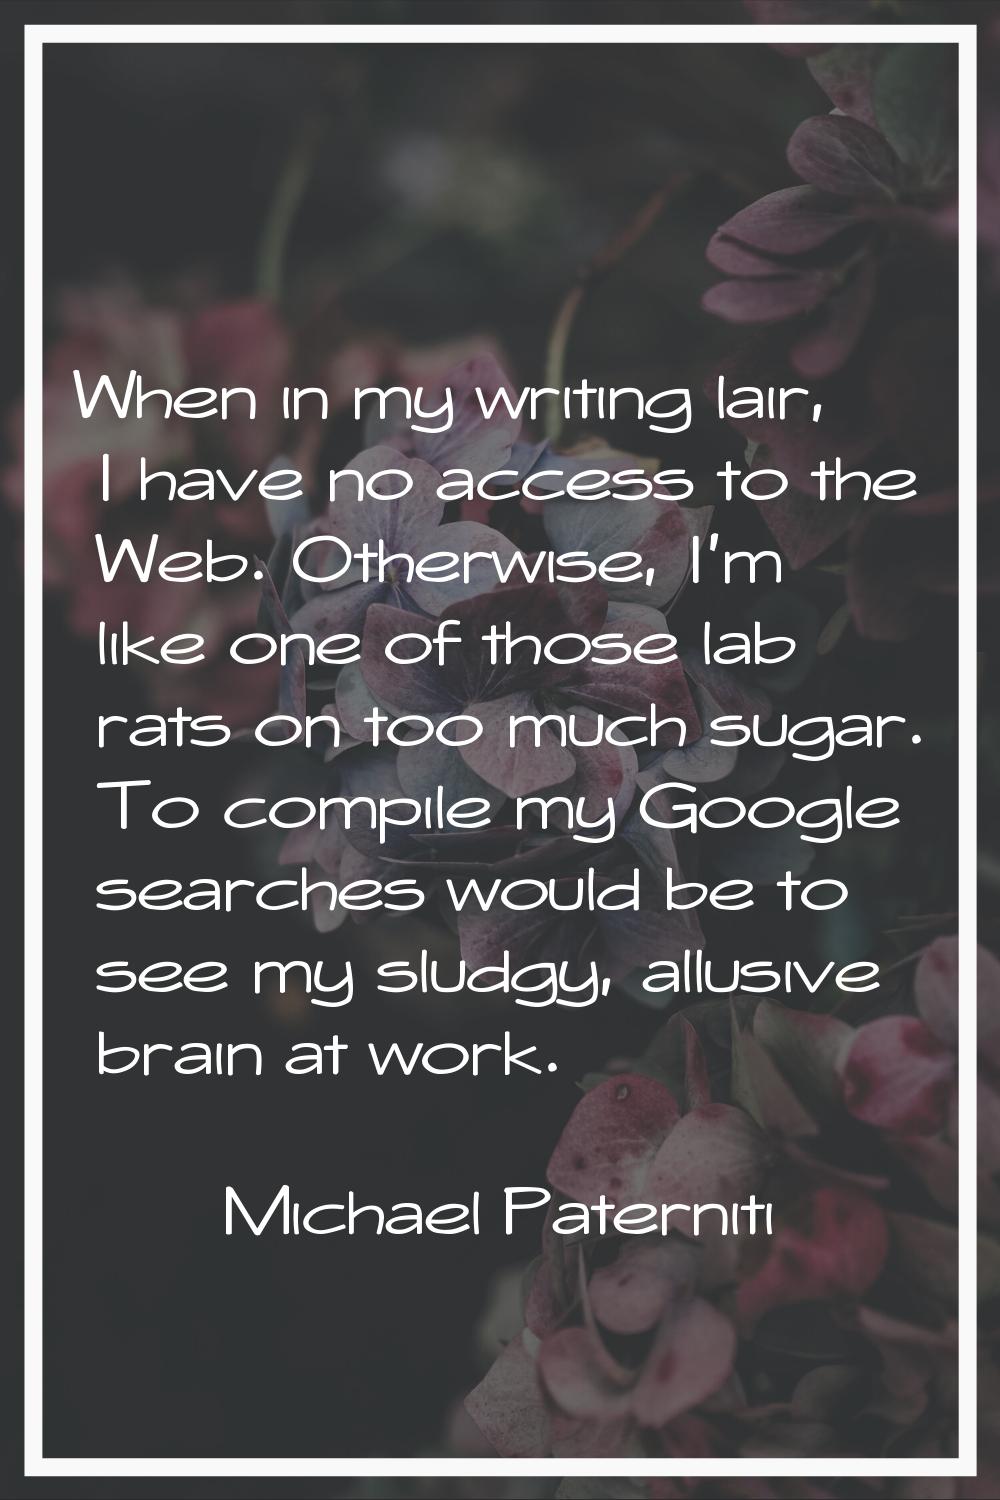 When in my writing lair, I have no access to the Web. Otherwise, I'm like one of those lab rats on 